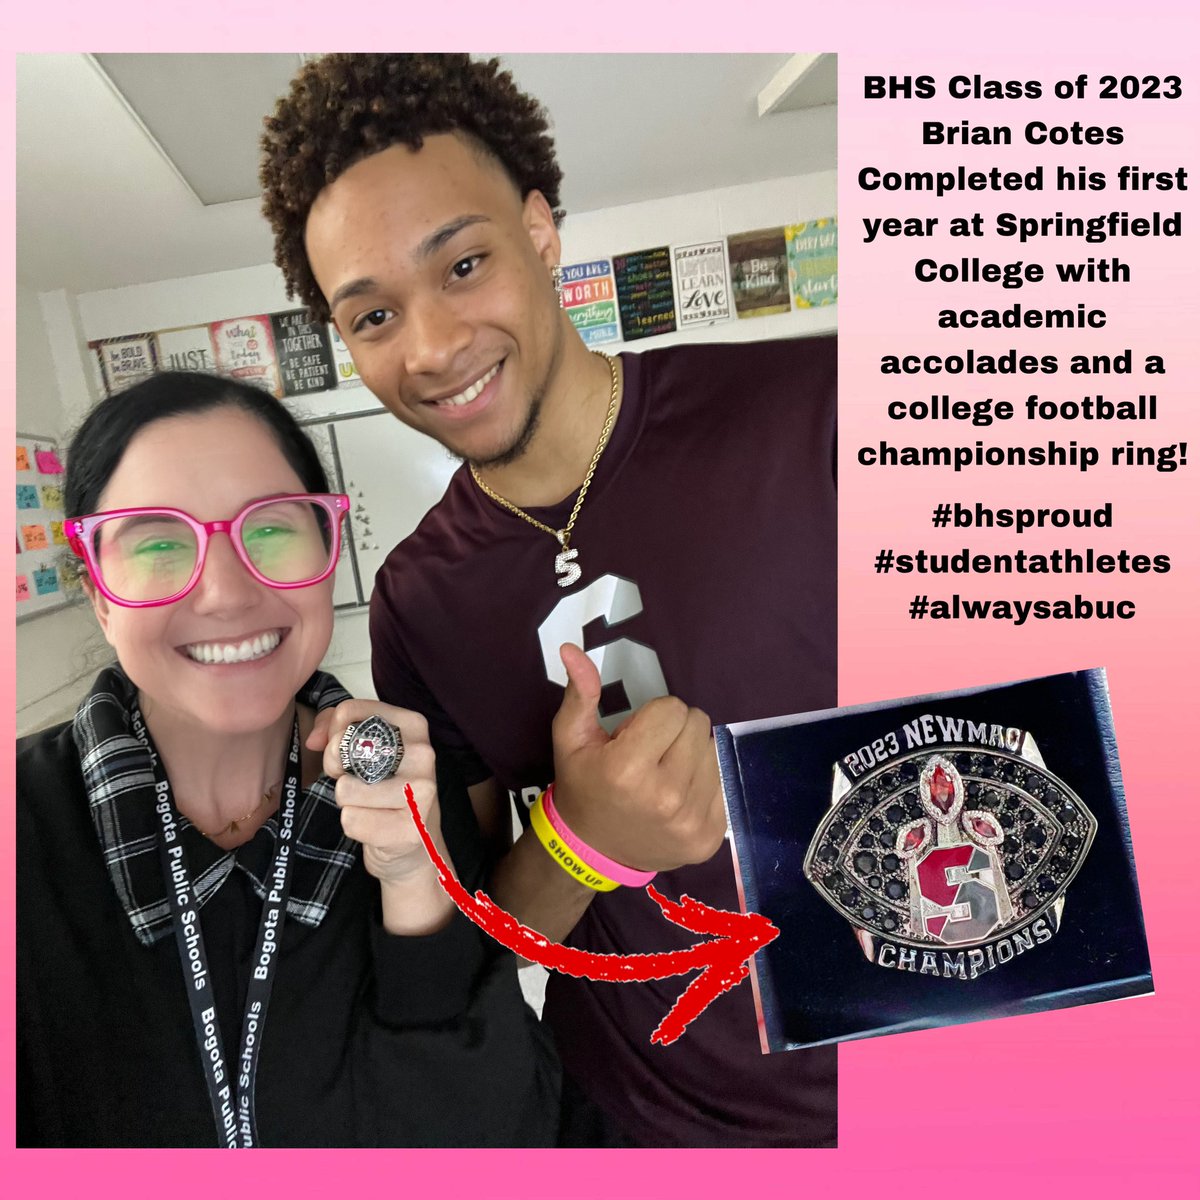 So grateful for today's visit from BHS Class of 2023 alum Brian Cotes! Brian just completed his first year at Springfield College with academic accolades and a football championship ring. 🙌🏻 Keep living the dream, Brian! We are so proud of you. ❤️📘🏈 @BogotaPublic  @CotesBrian